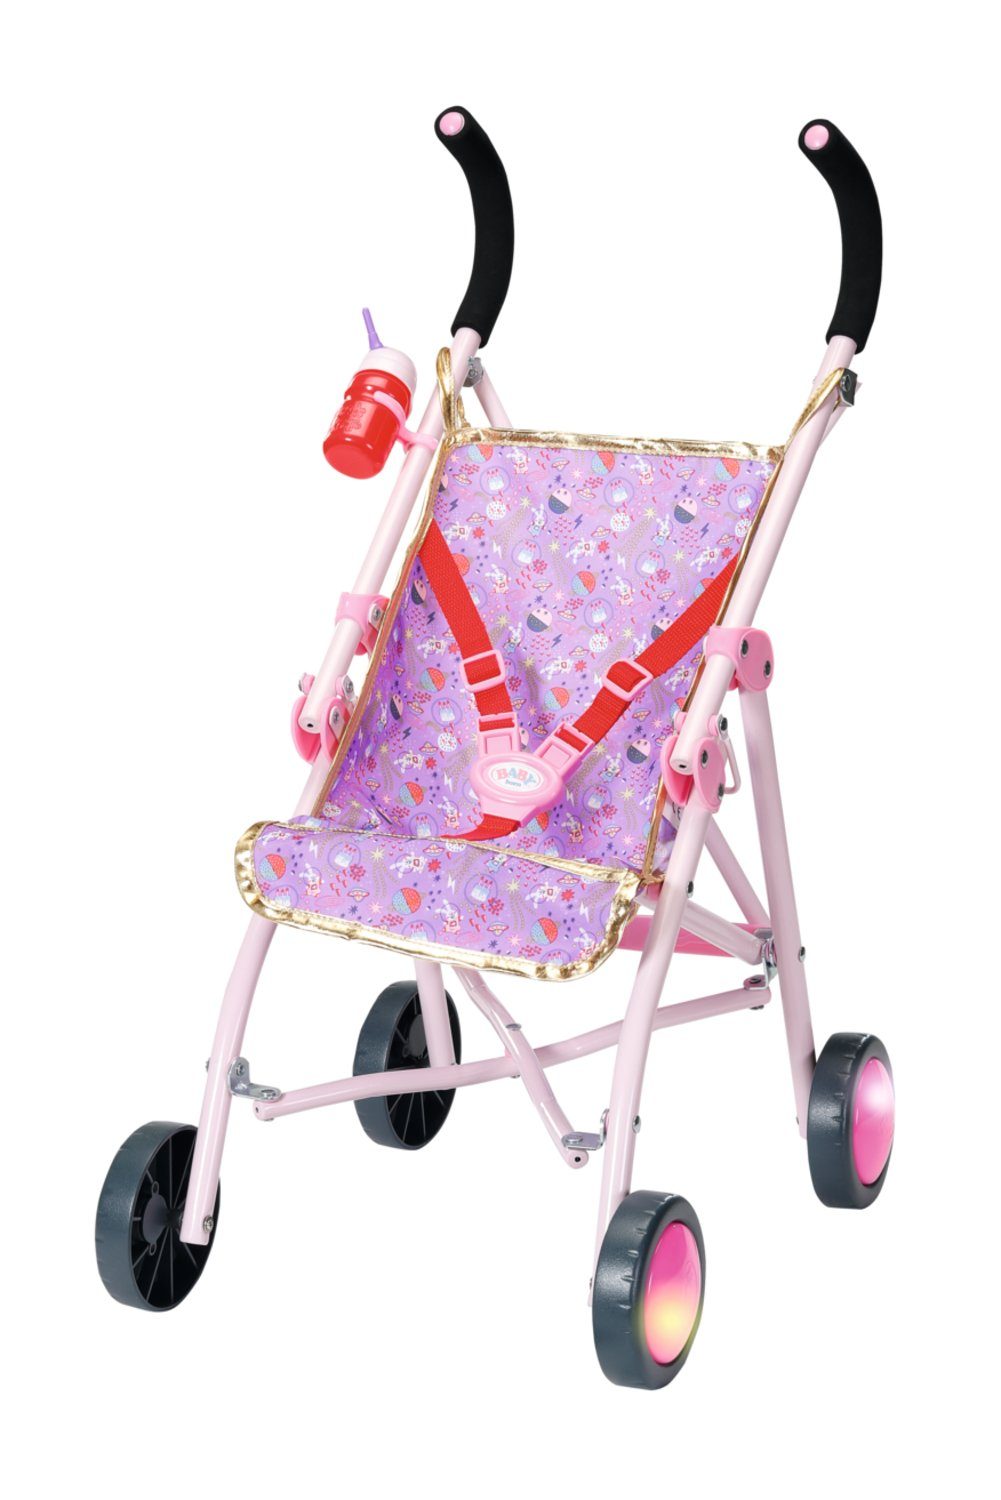 Baby Annabell Puppen Accessoires-Set 829950 - BABY born Happy Birthday  Deluxe Buggy - Puppe